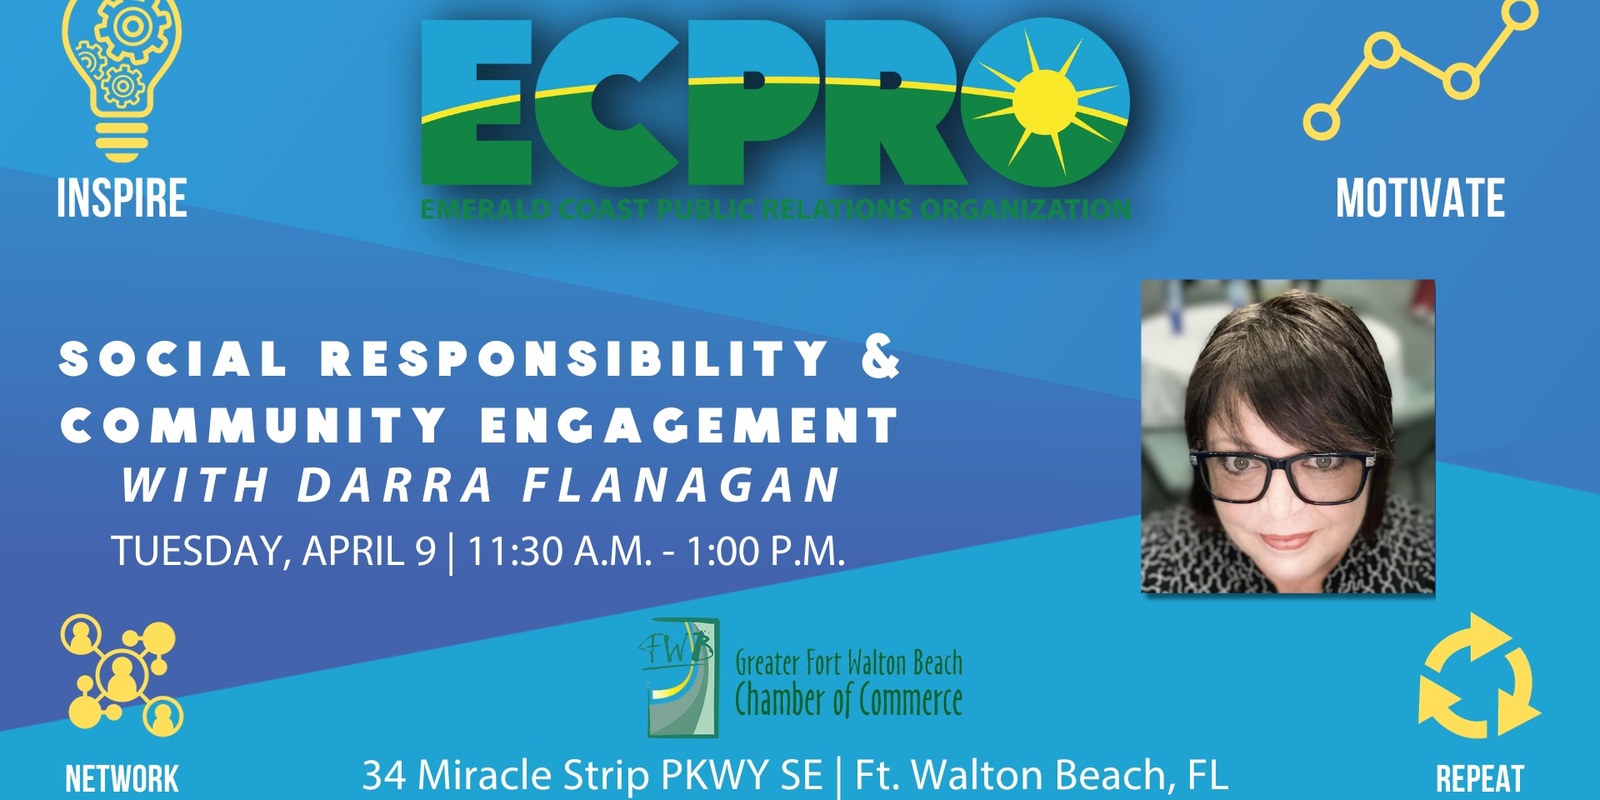 Banner image for Social Responsibility & Community Engagement with Darra Flanagan